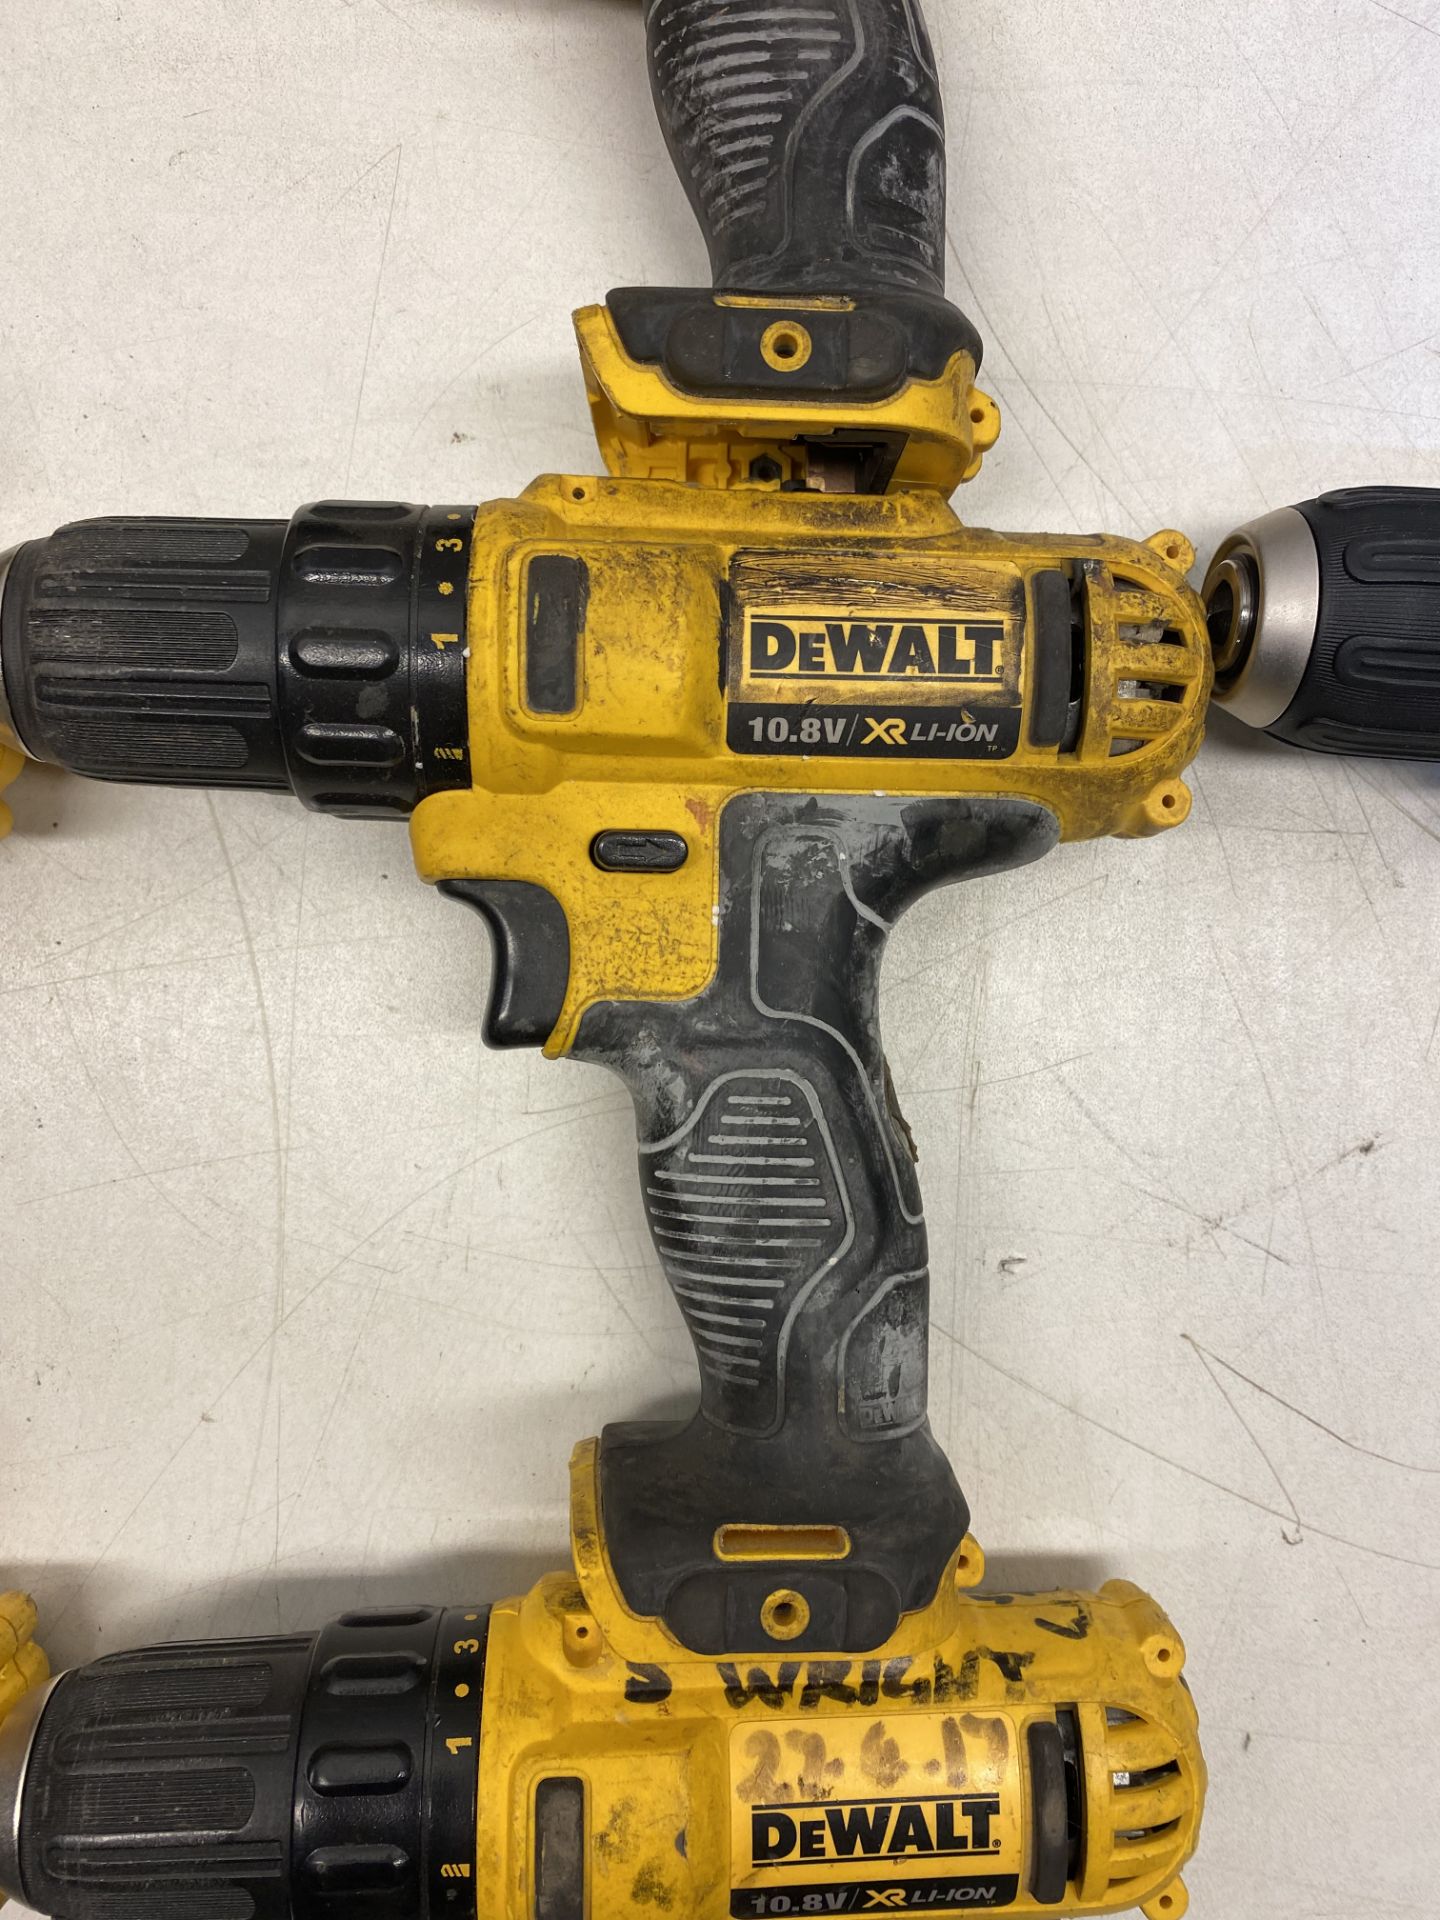 8 x USED DeWalt DCD710 10.8V XR Cordless Compact Drill Drivers - See Photos - Image 6 of 9